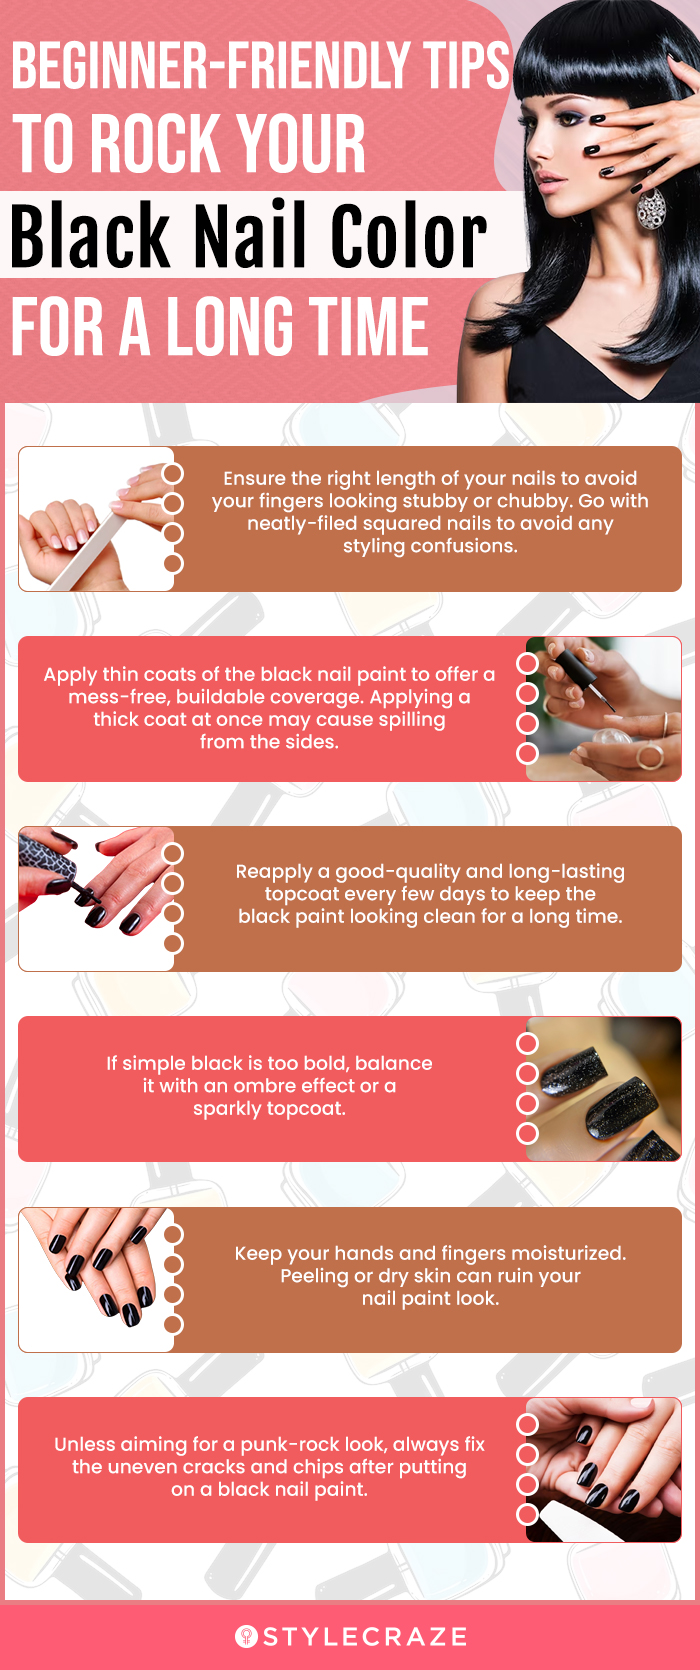 Beginner-Friendly Tips To Rock Your Black Nail Color For A Long Time (infographic)